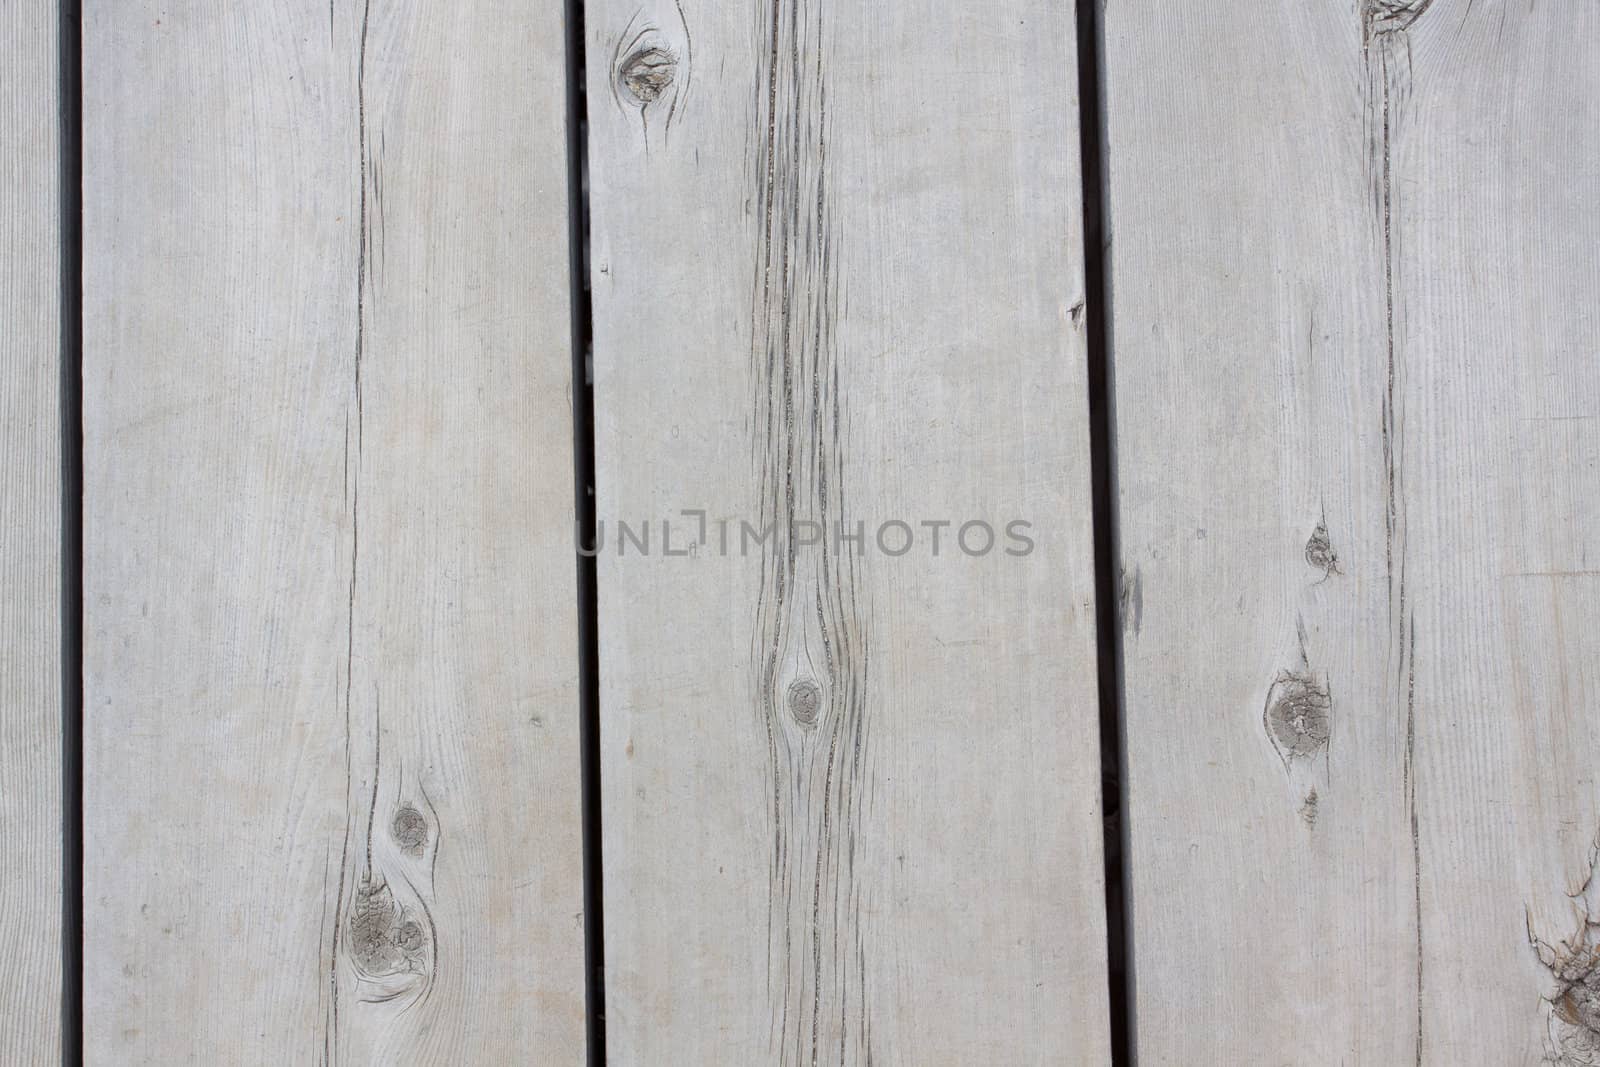 A very old section of a dock at Lake Tahoe showing the wooden planks and boards that make up the structure.